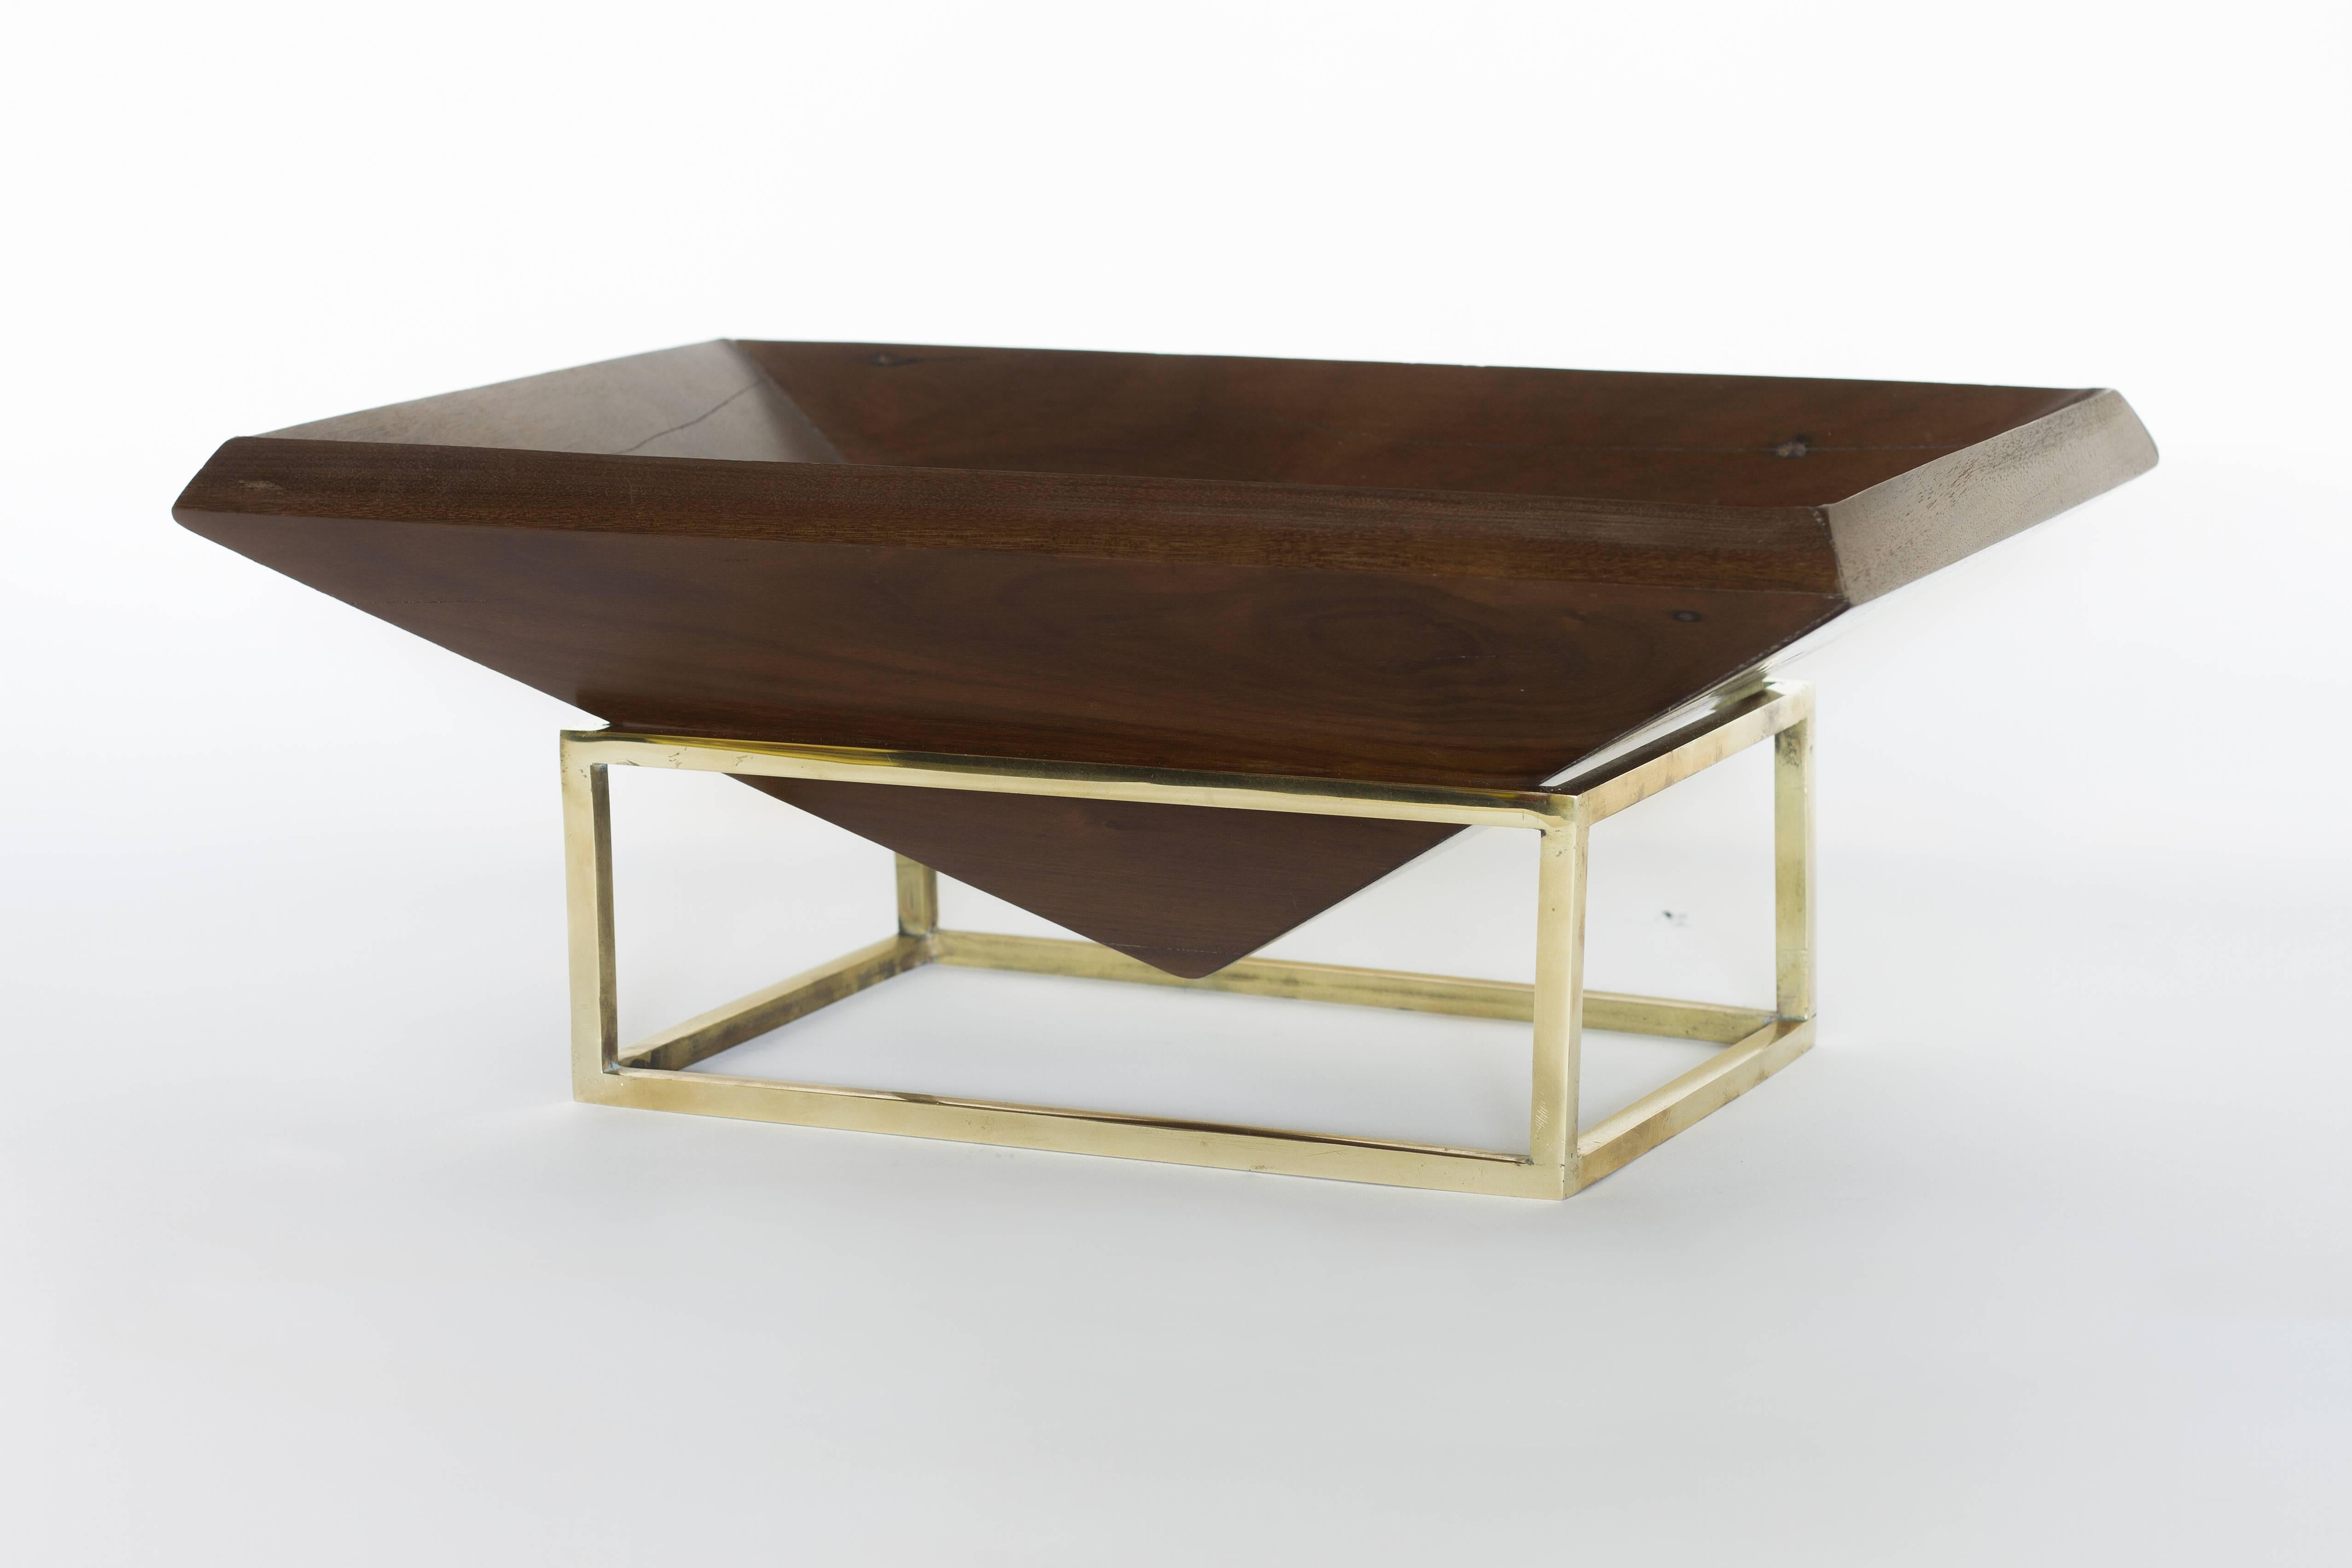 Brazilian Centerpiece in Wood and Brass. Contemporary Design by O Formigueiro For Sale